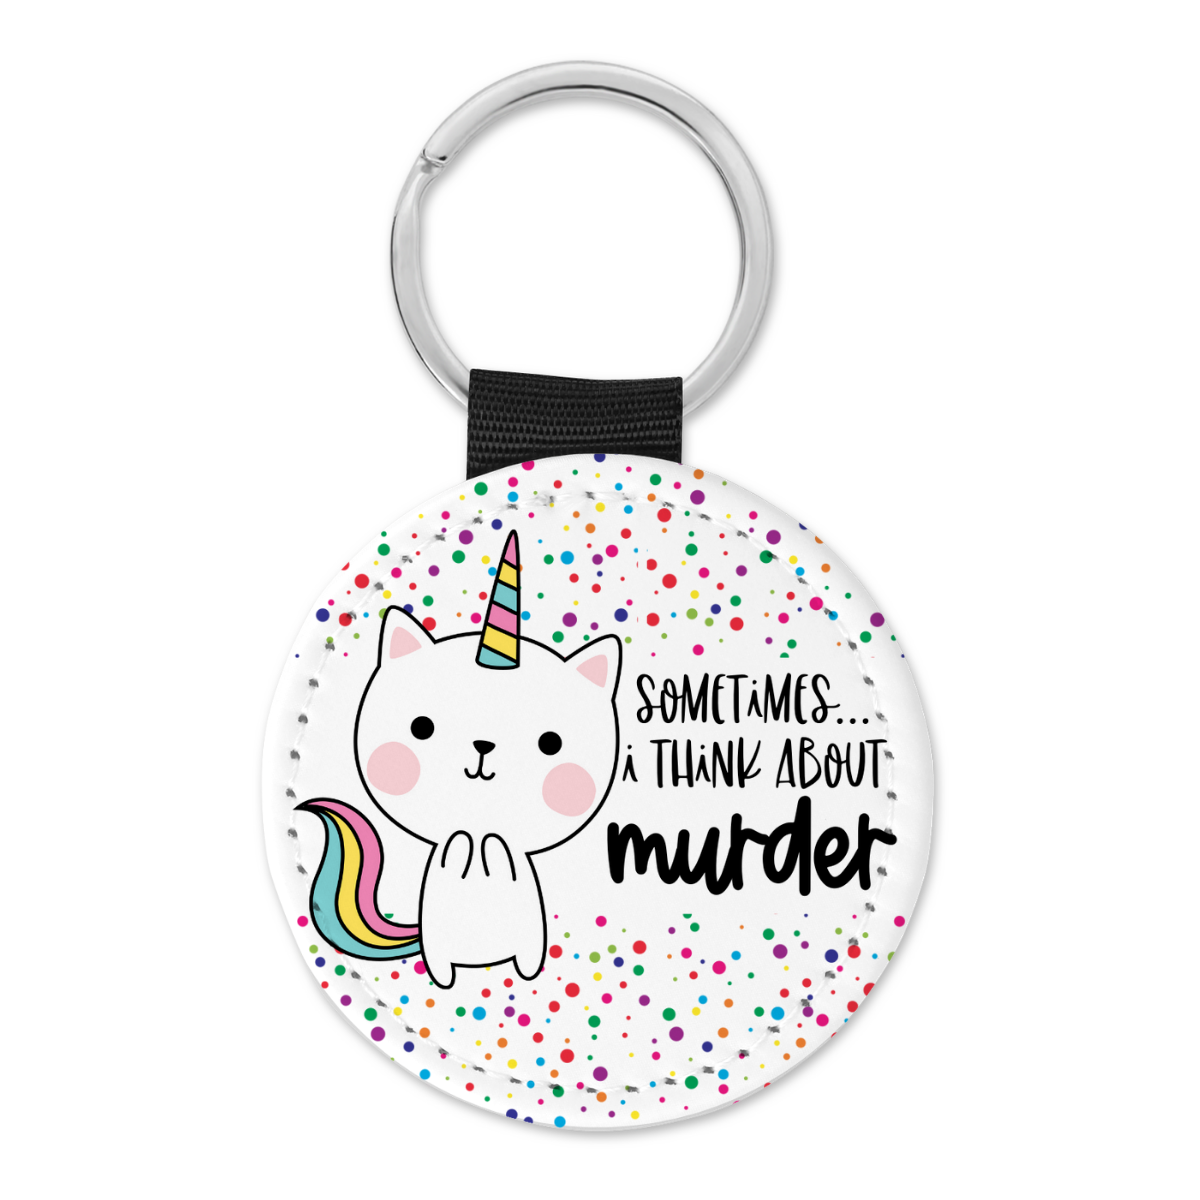 Sometimes I Think About Murder | Keyring - The Pretty Things.ca